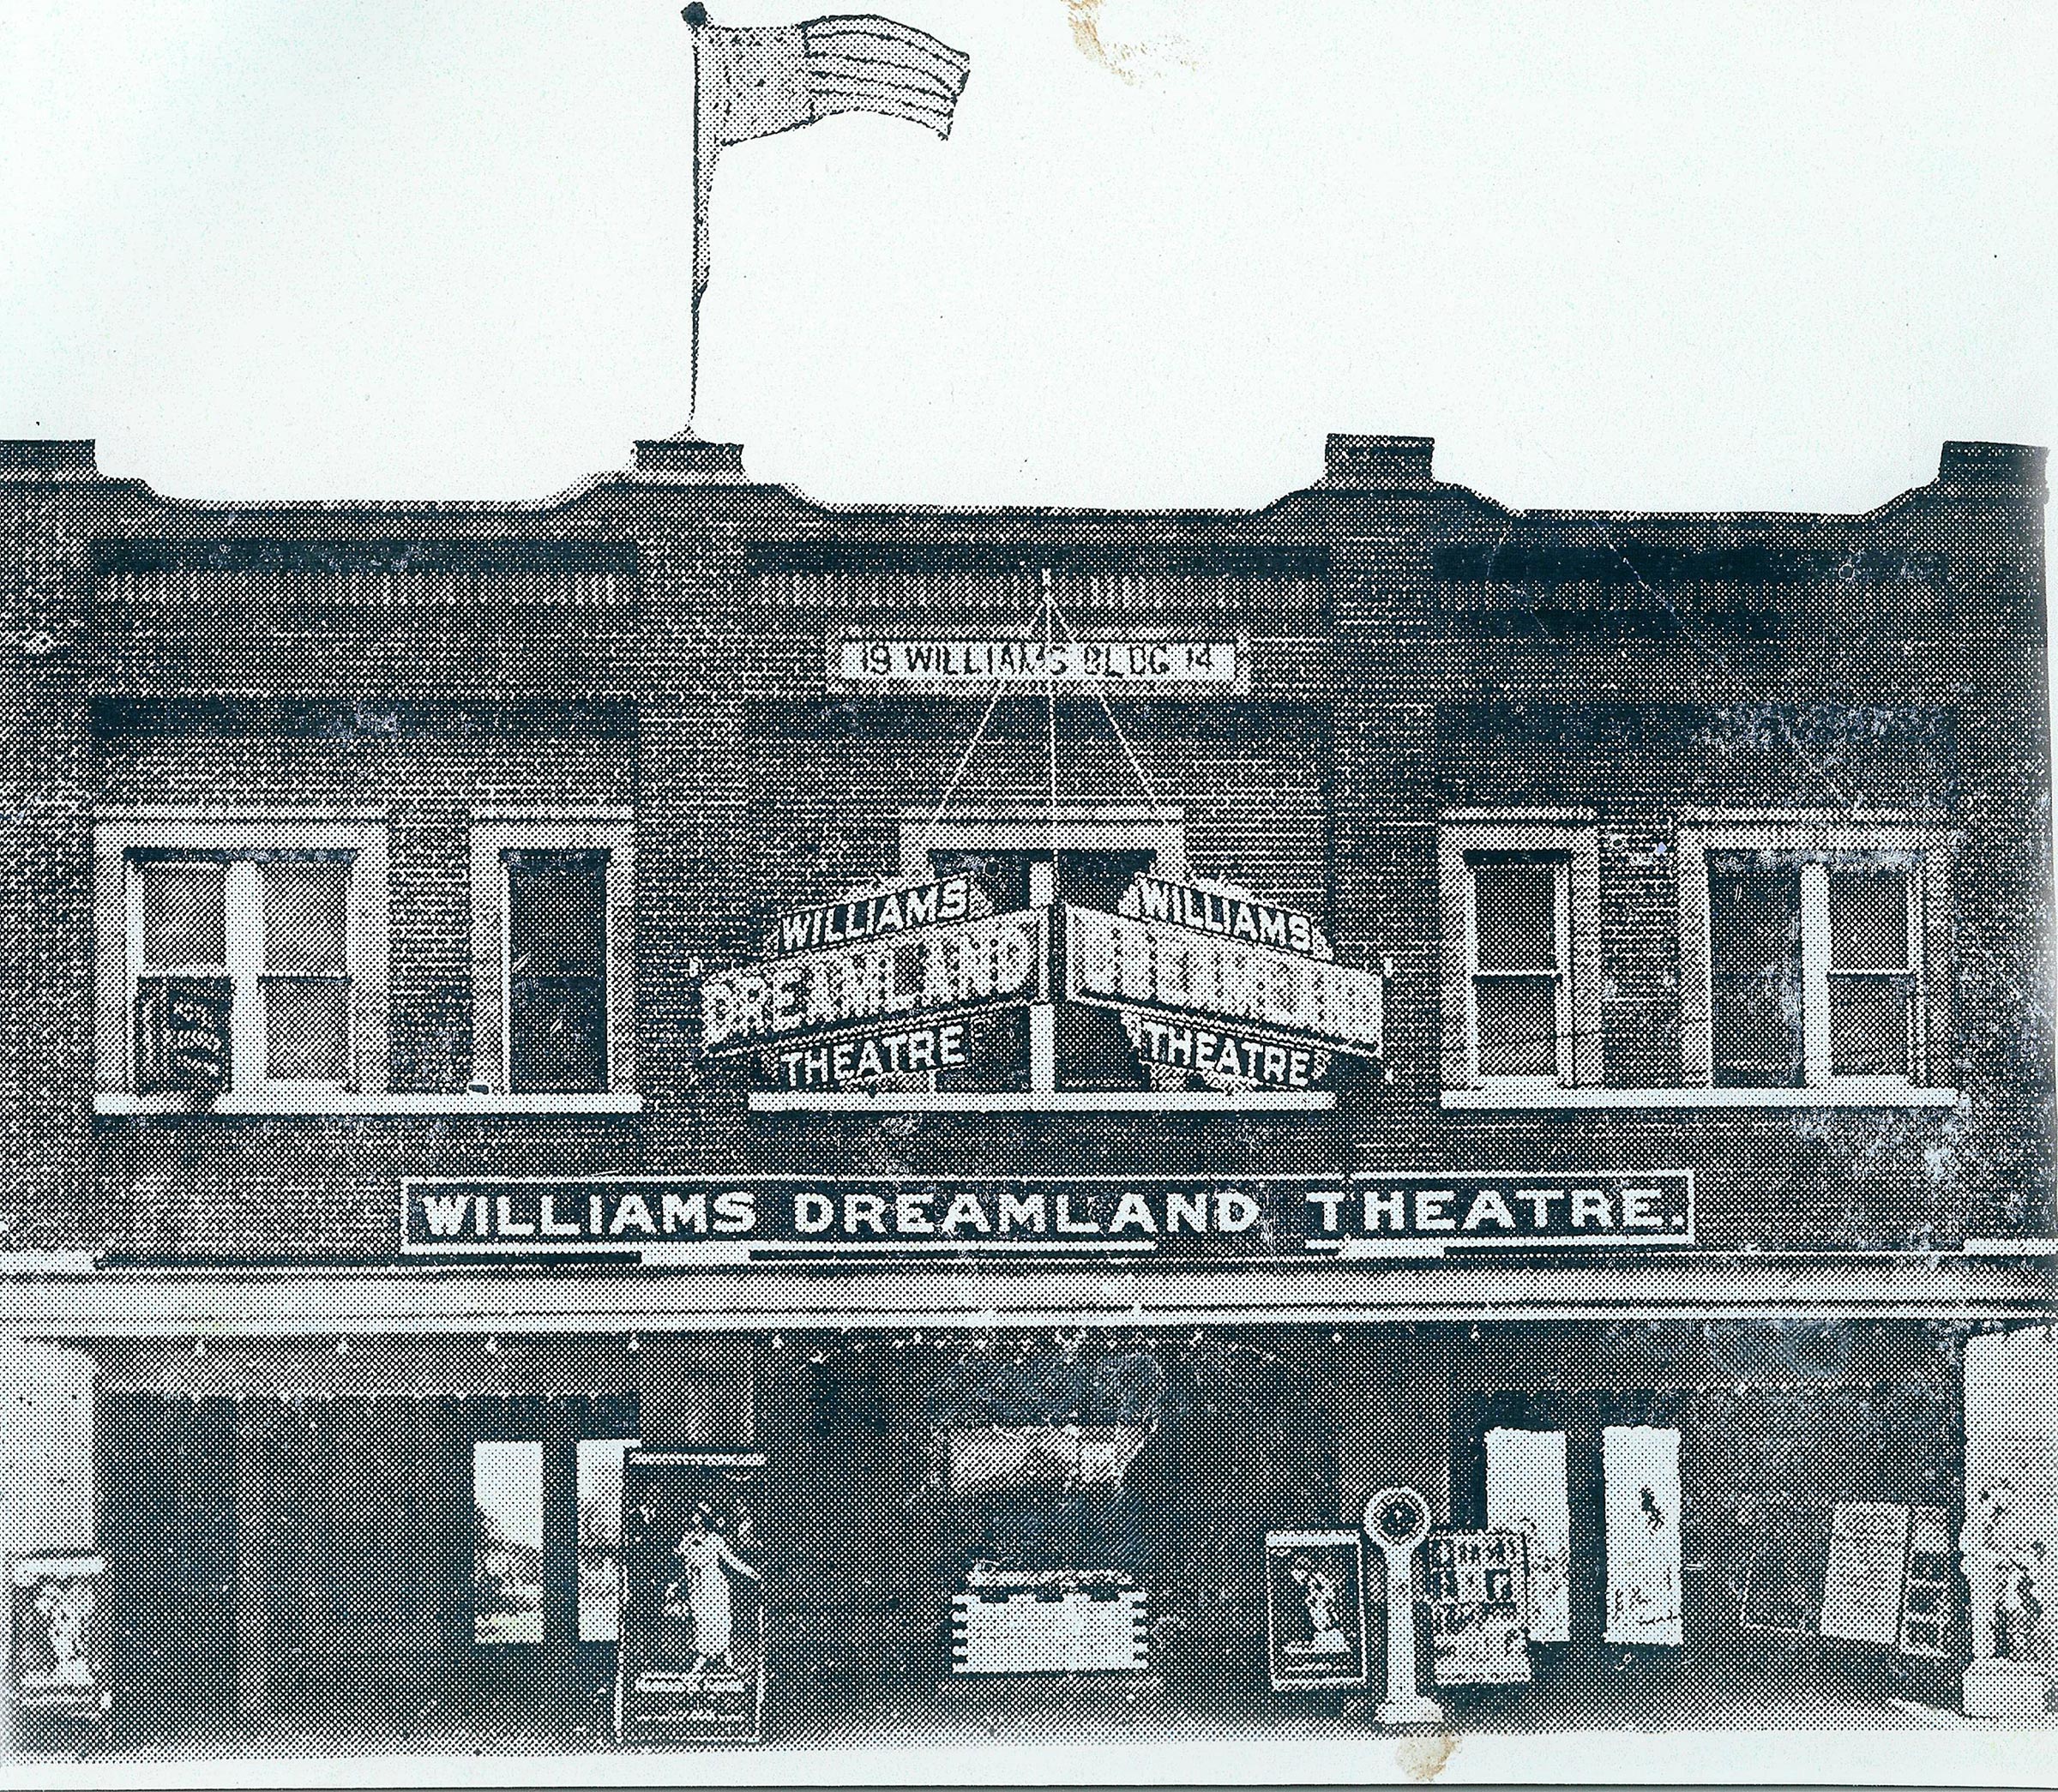 The Williams Dreamland Theatre in Tulsa, Okla., before it was destroyed during the Tulsa Race Massacre. (Greenwood Cultural Center/Getty Images)